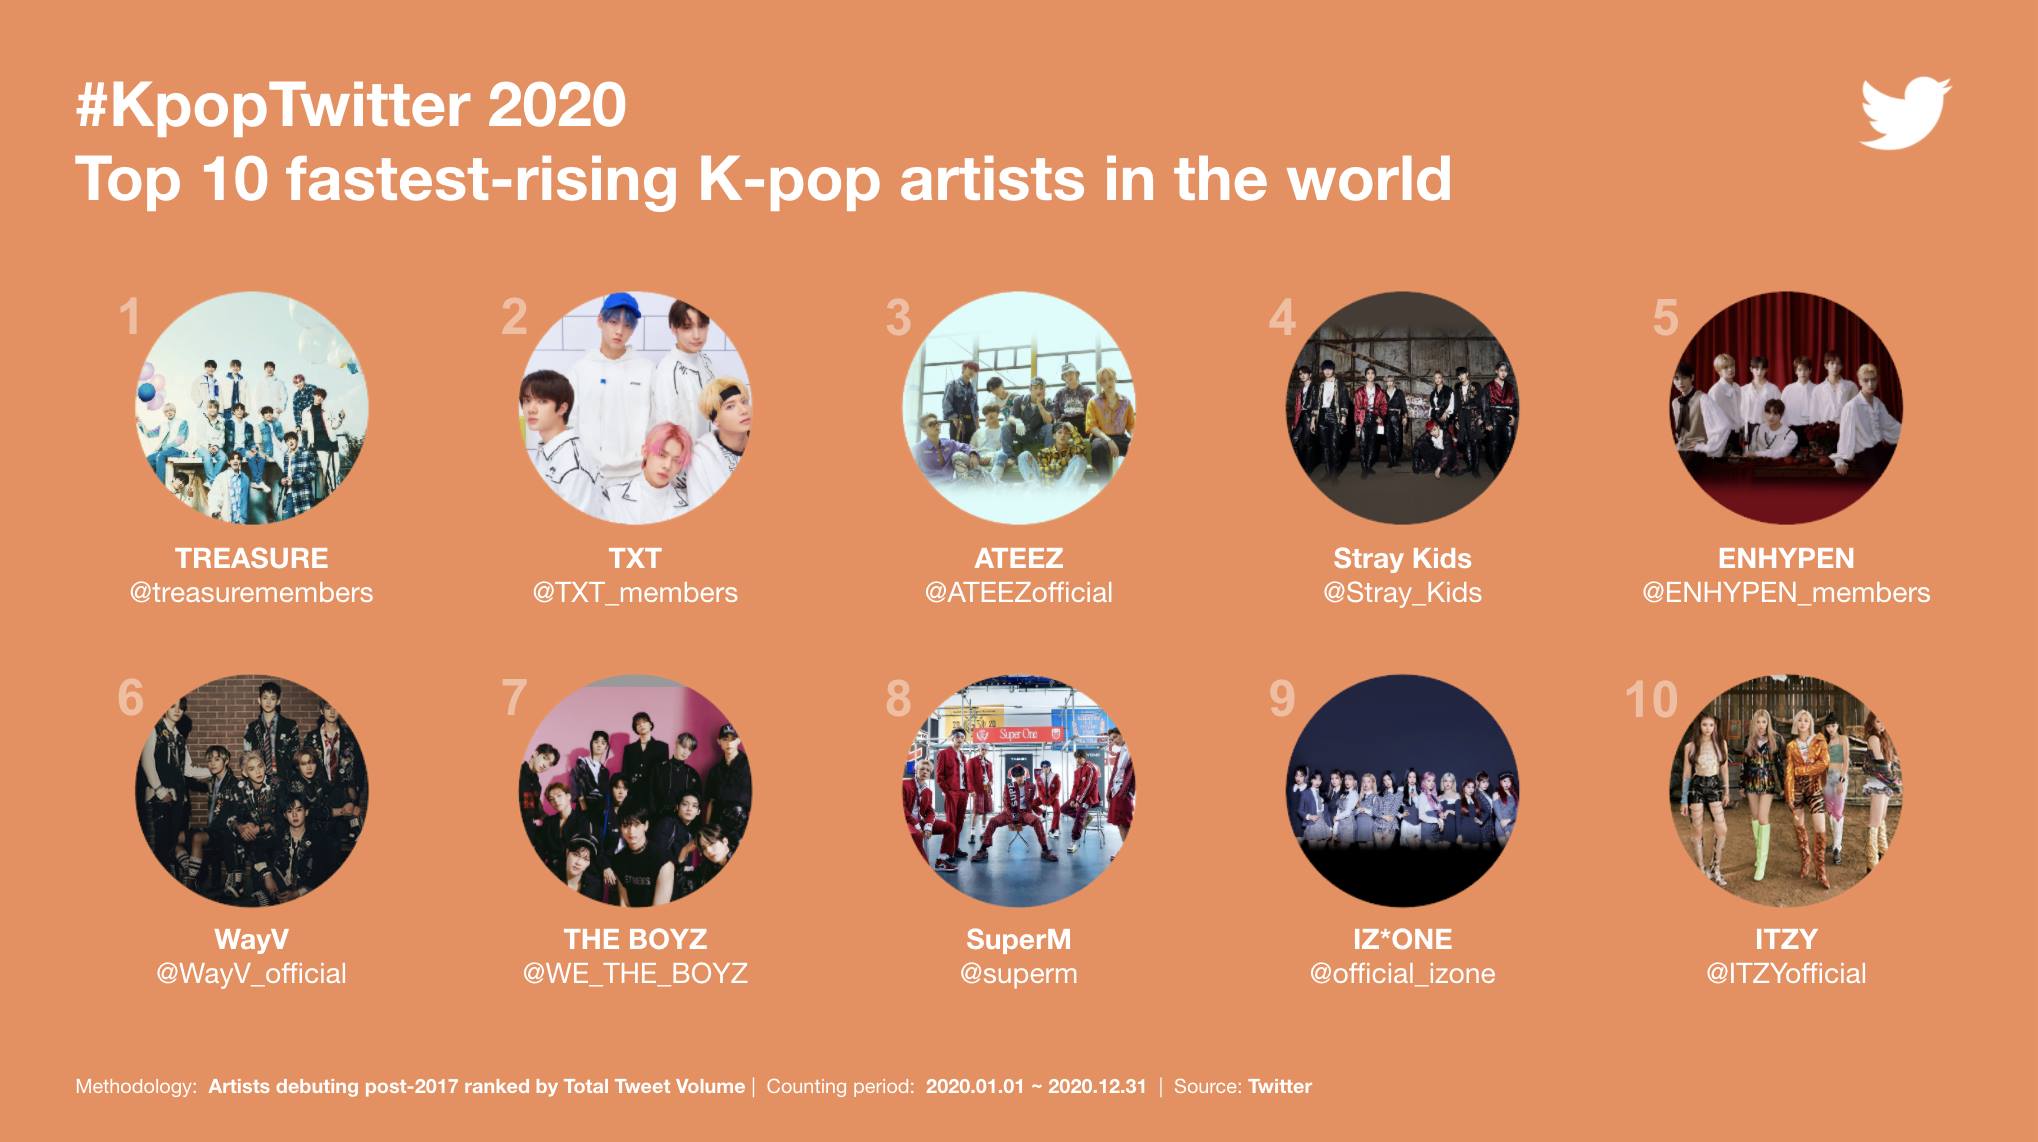 top-10-most-mentioned-k-pop-groups-songs-and-rising-artists-on-twitter-2020